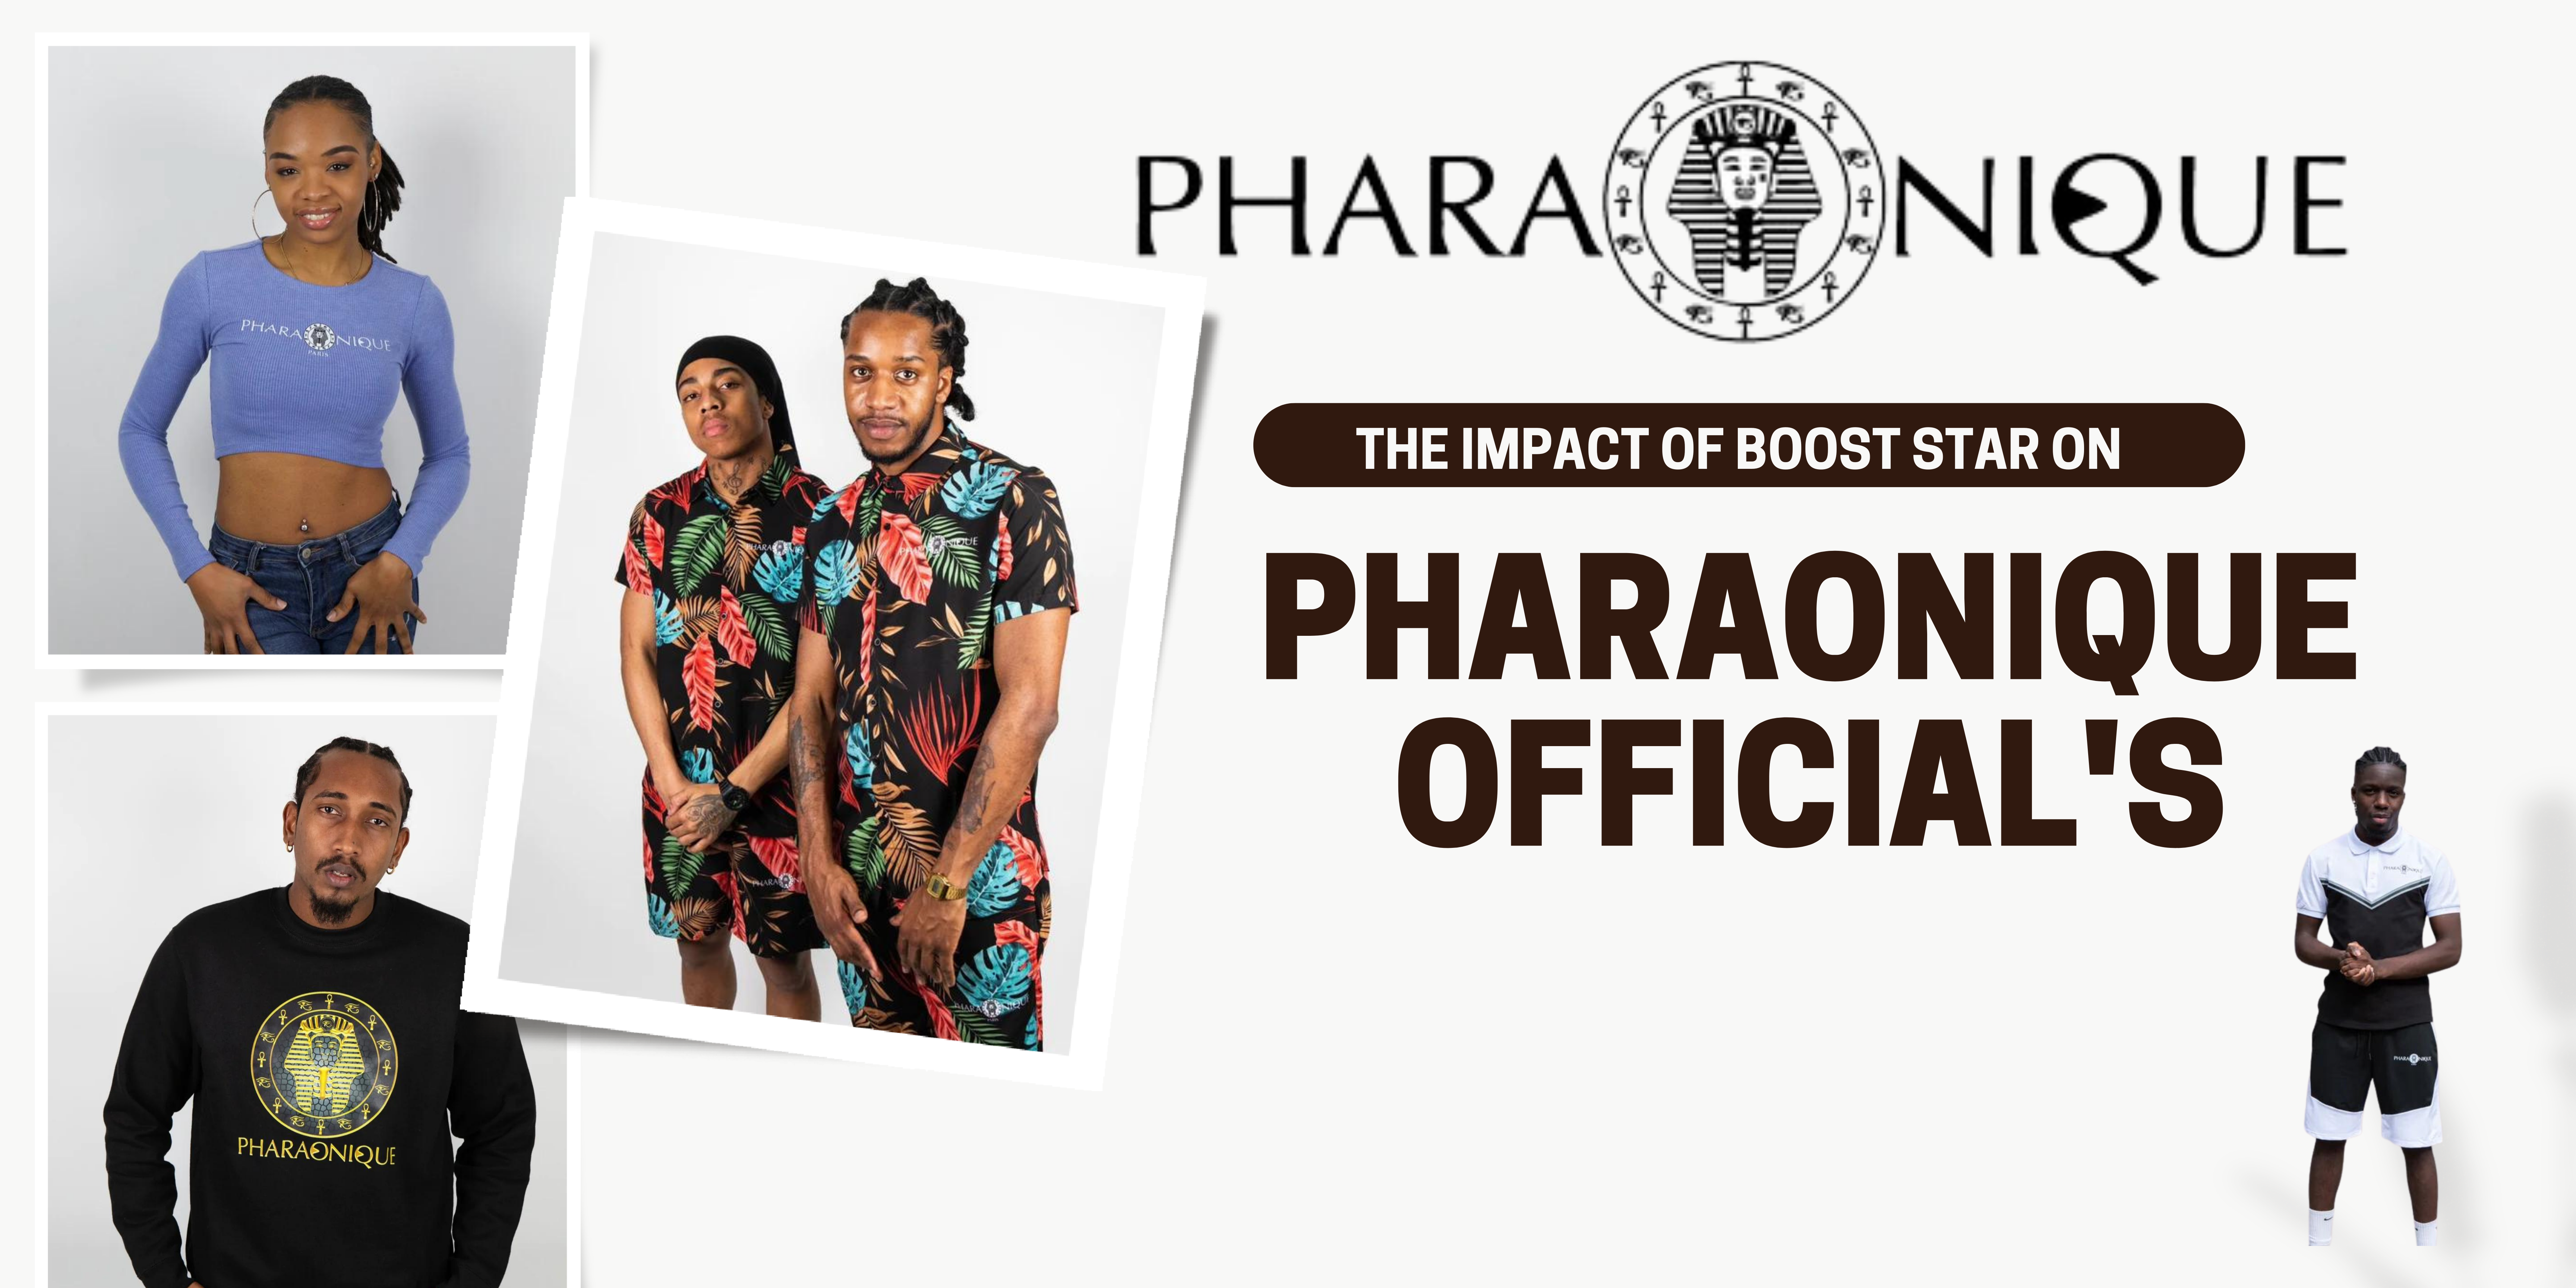 Enhancing E-commerce Expansion: The Impact of BOOST STAR on Pharaonique Official's Online